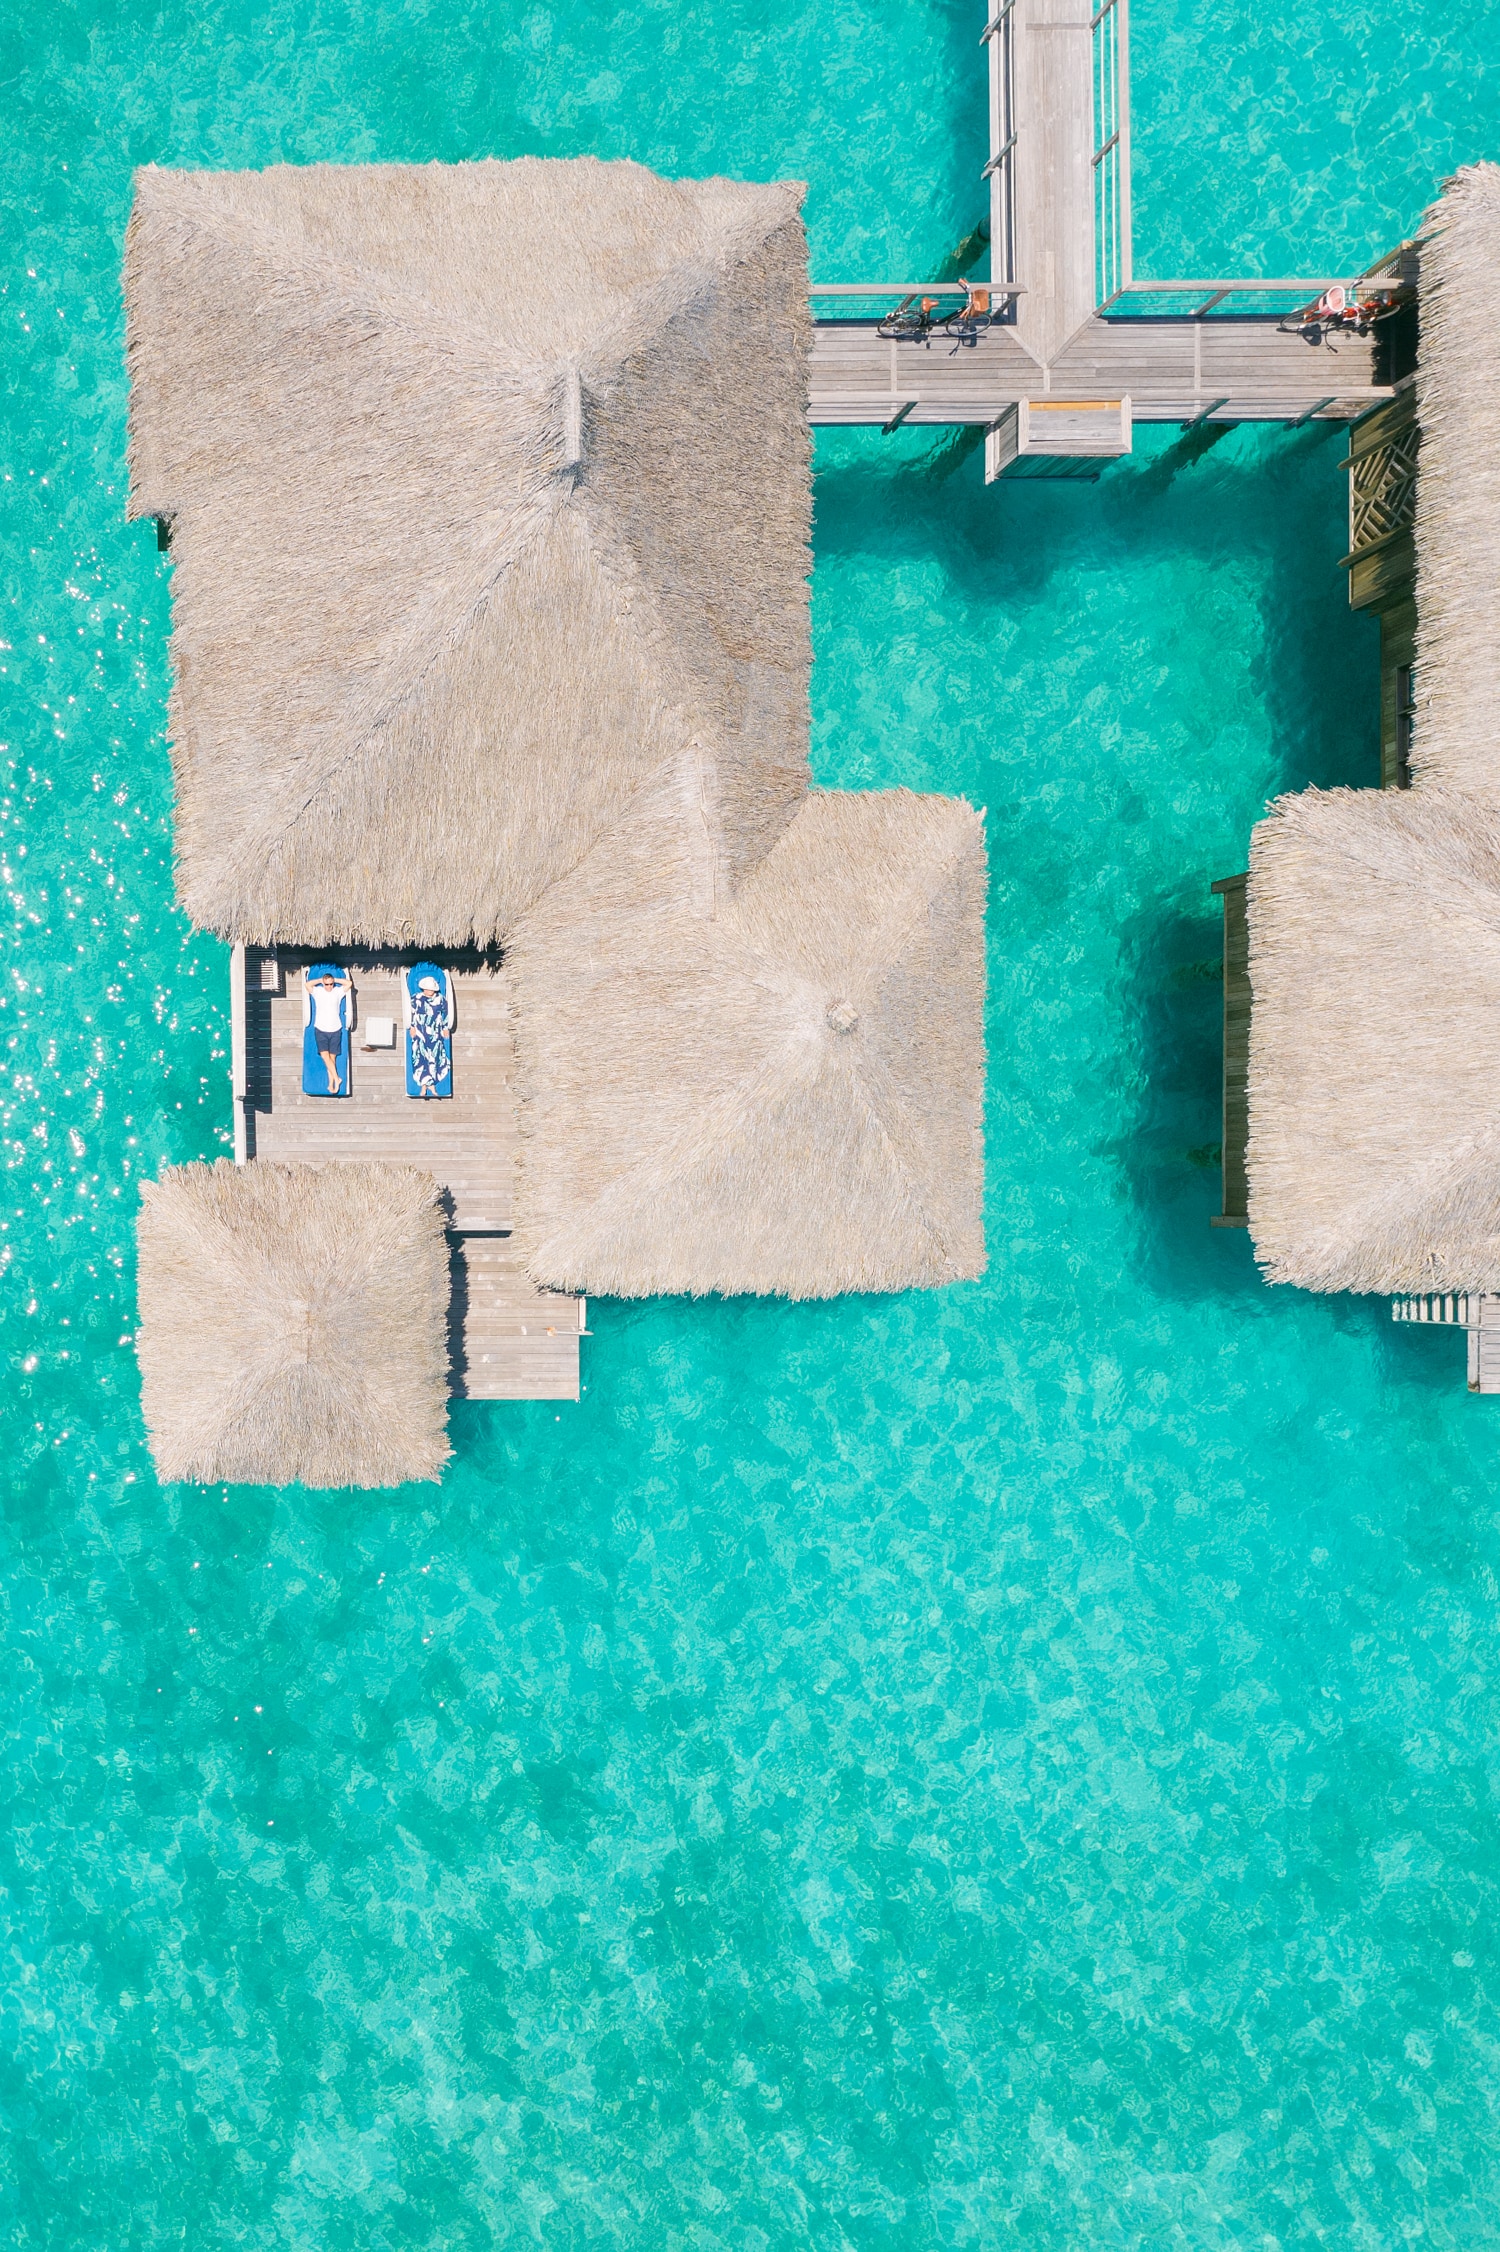 Flat view with the drone on the overwater bungalow at Bora Bora